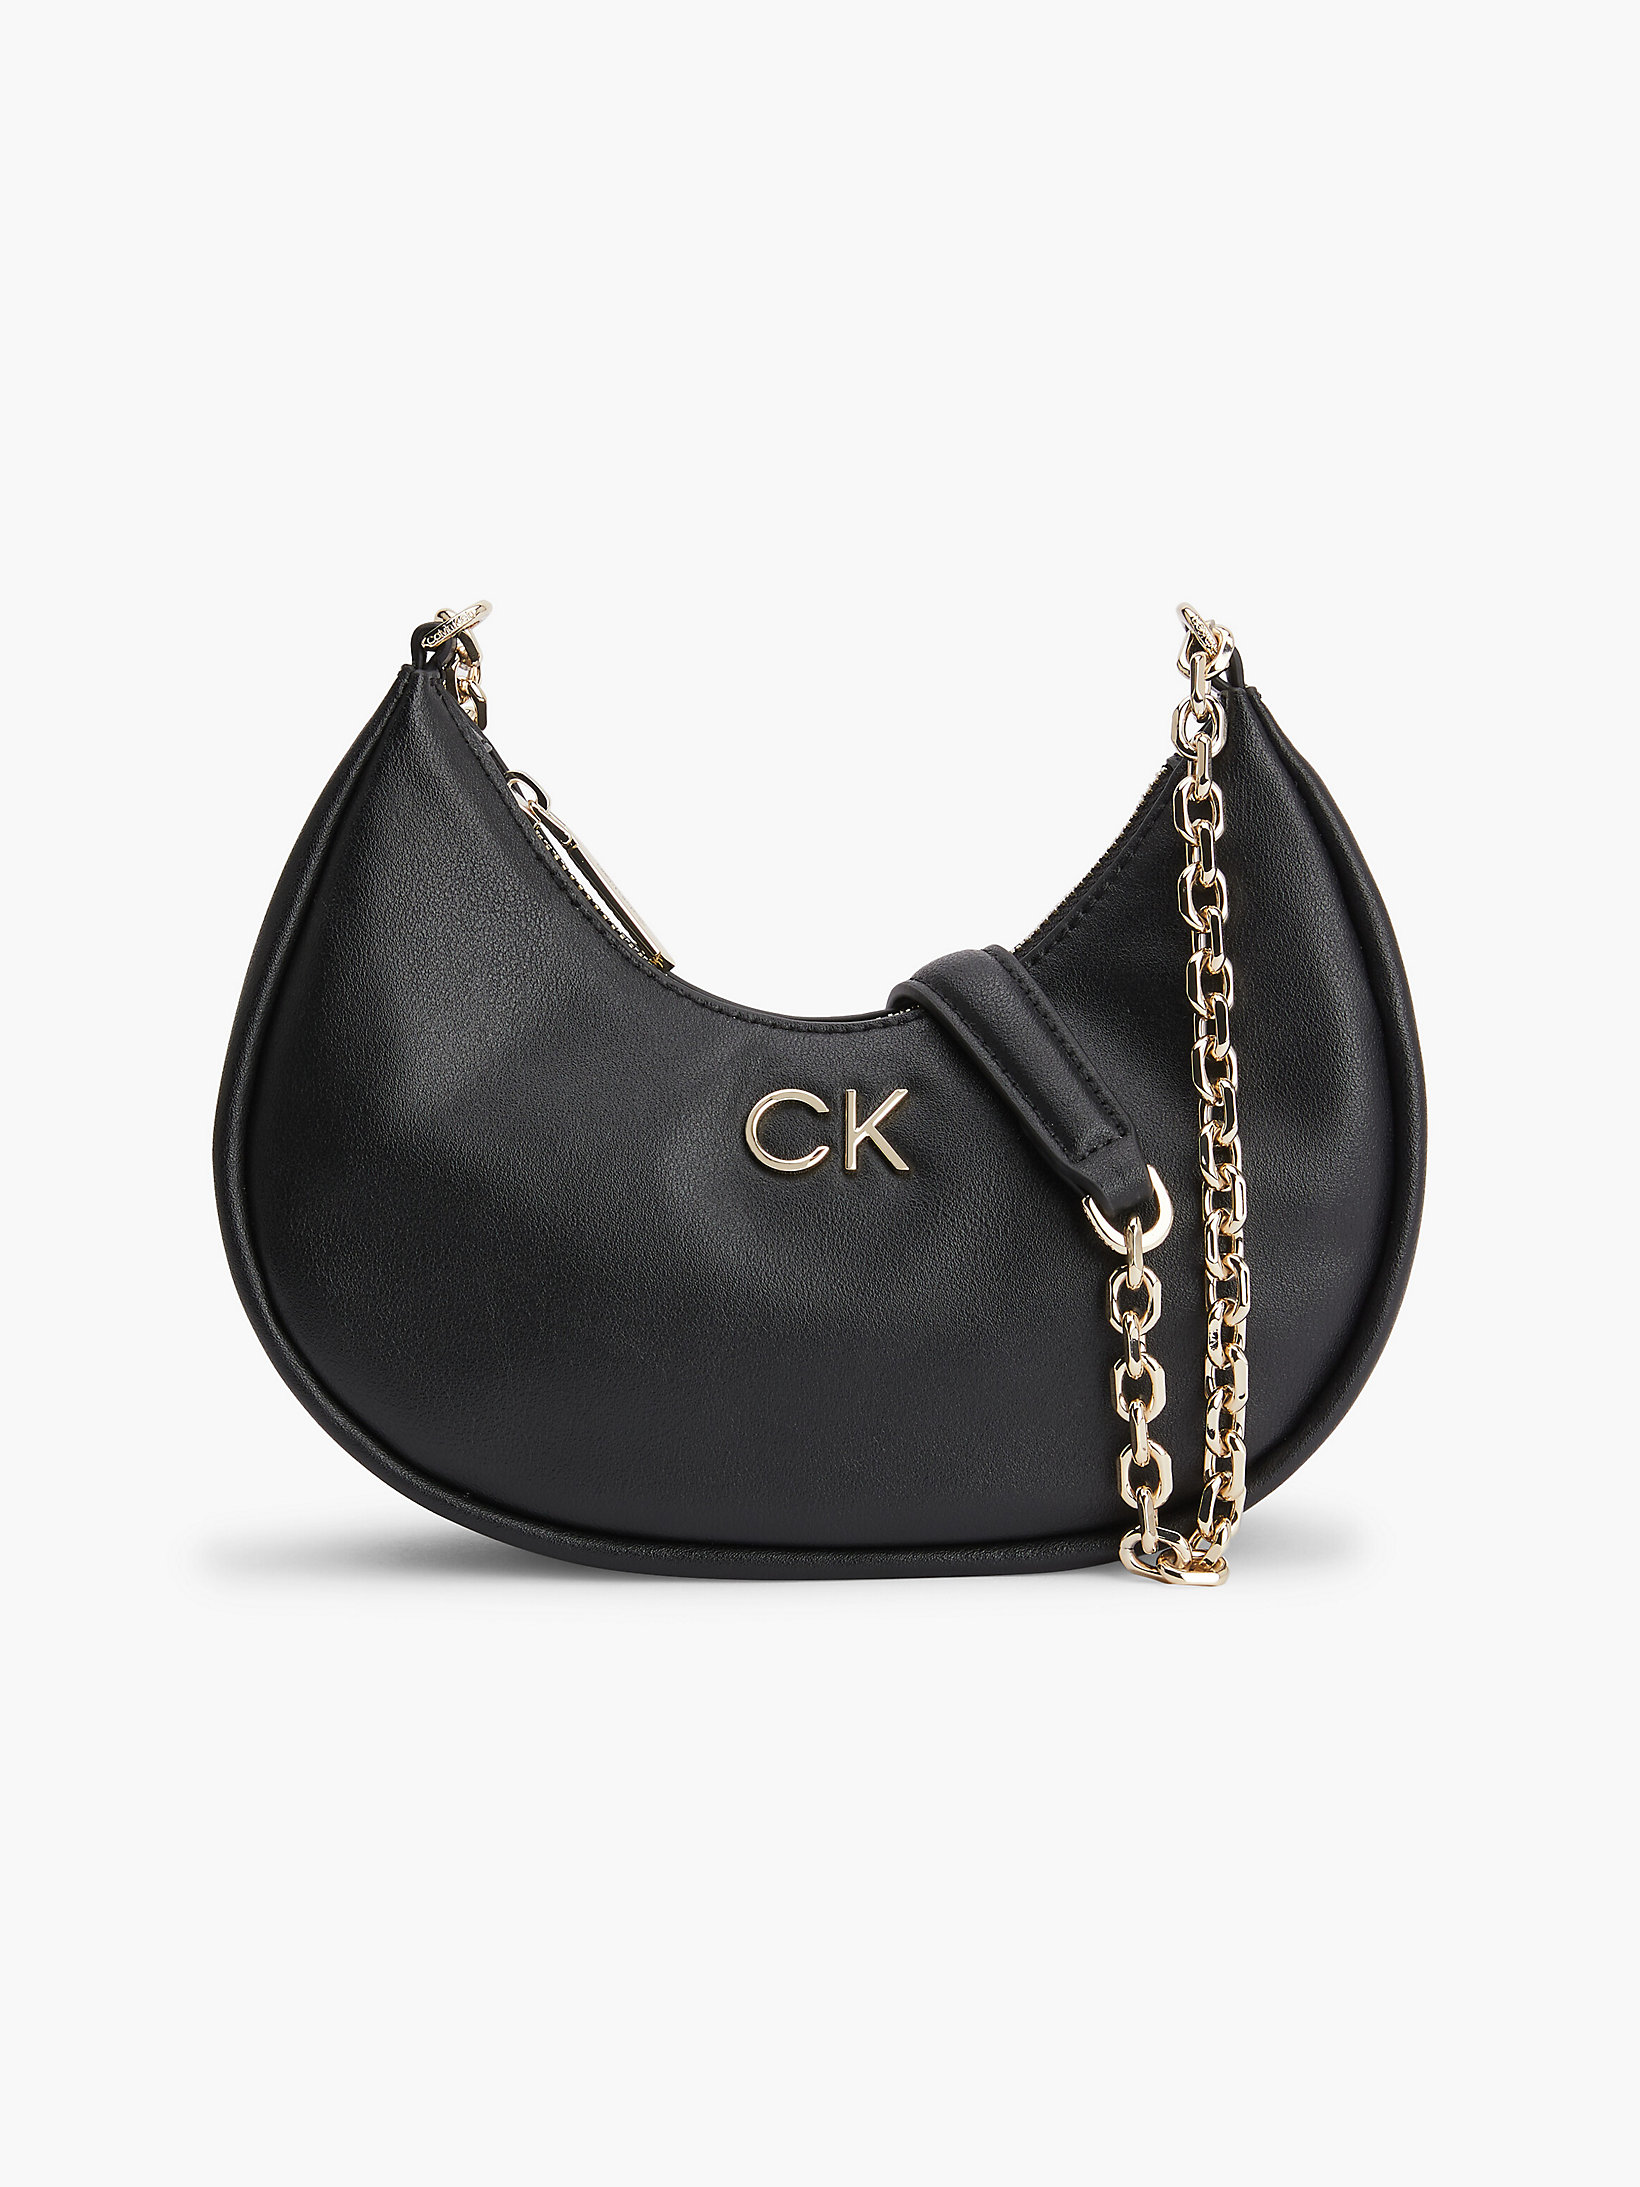 CK Black Small Recycled Shoulder Bag undefined women Calvin Klein